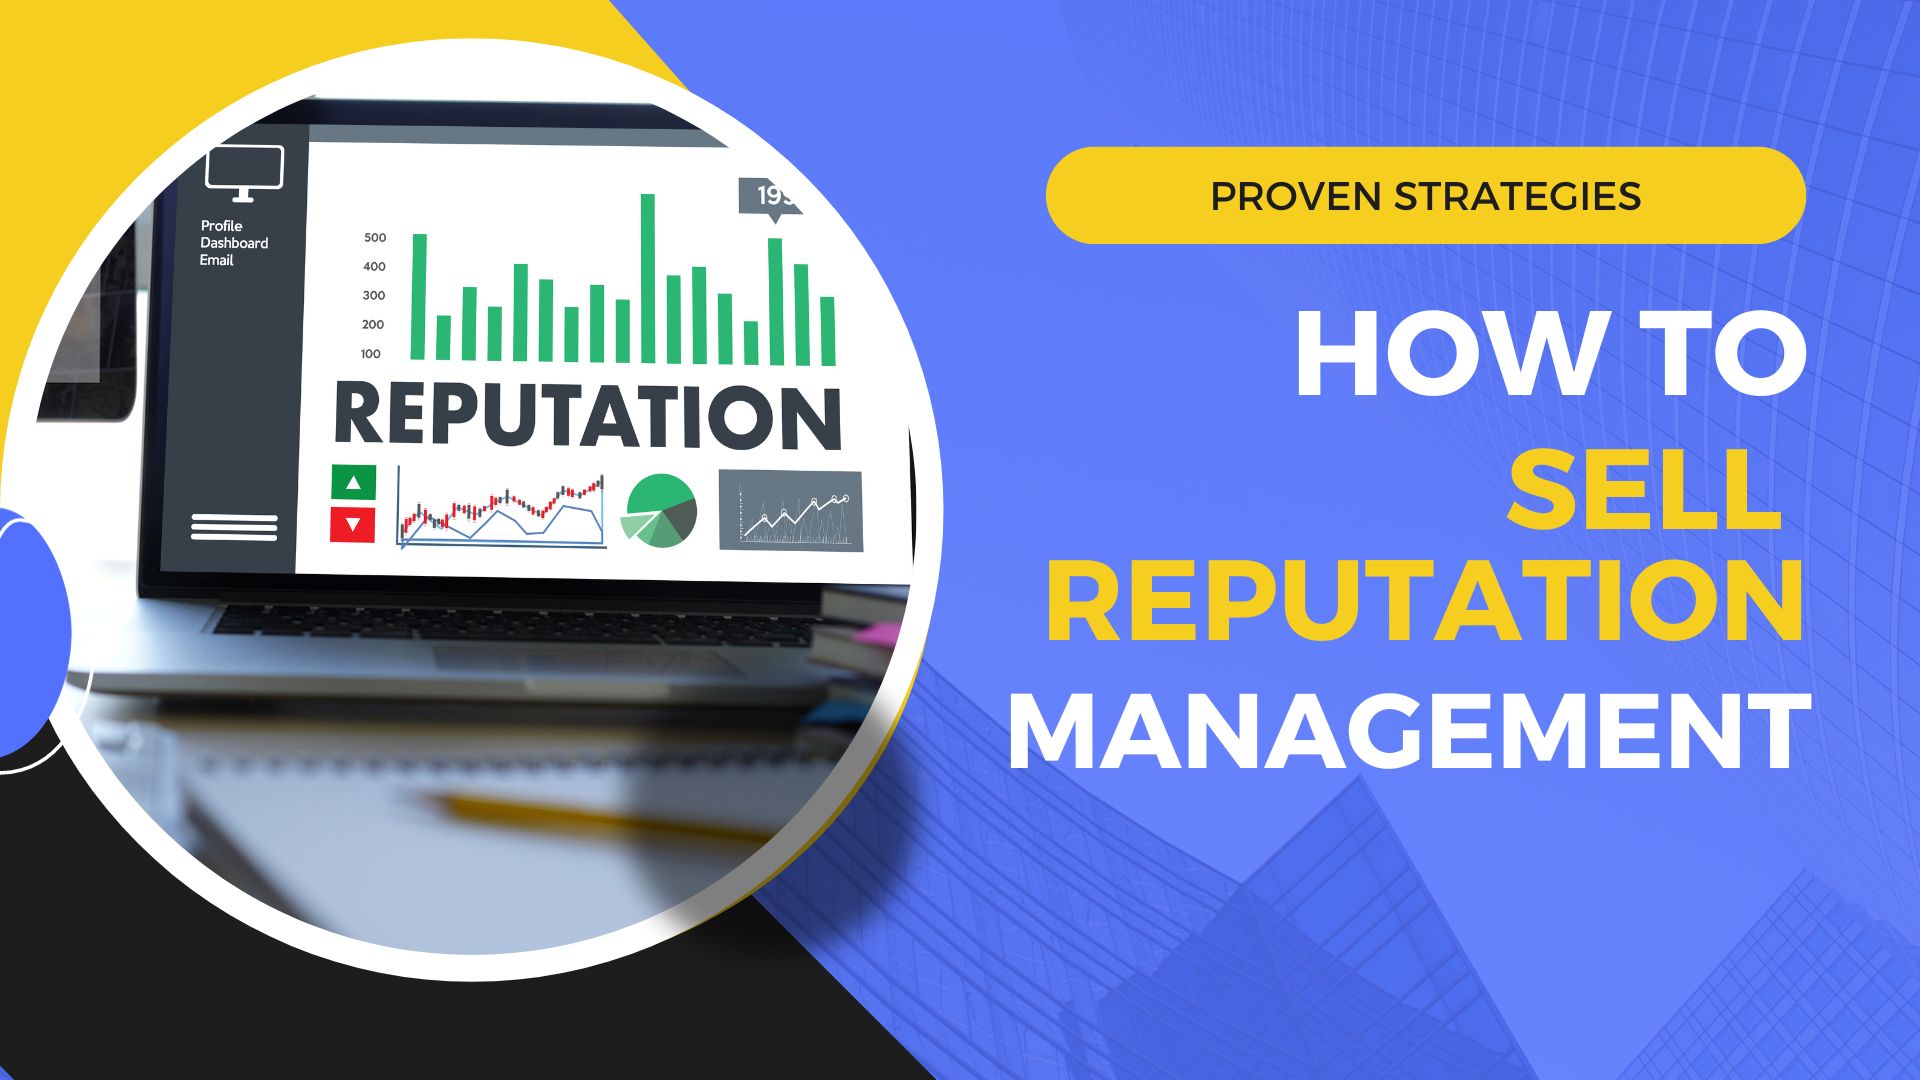 How to Sell Reputation Management